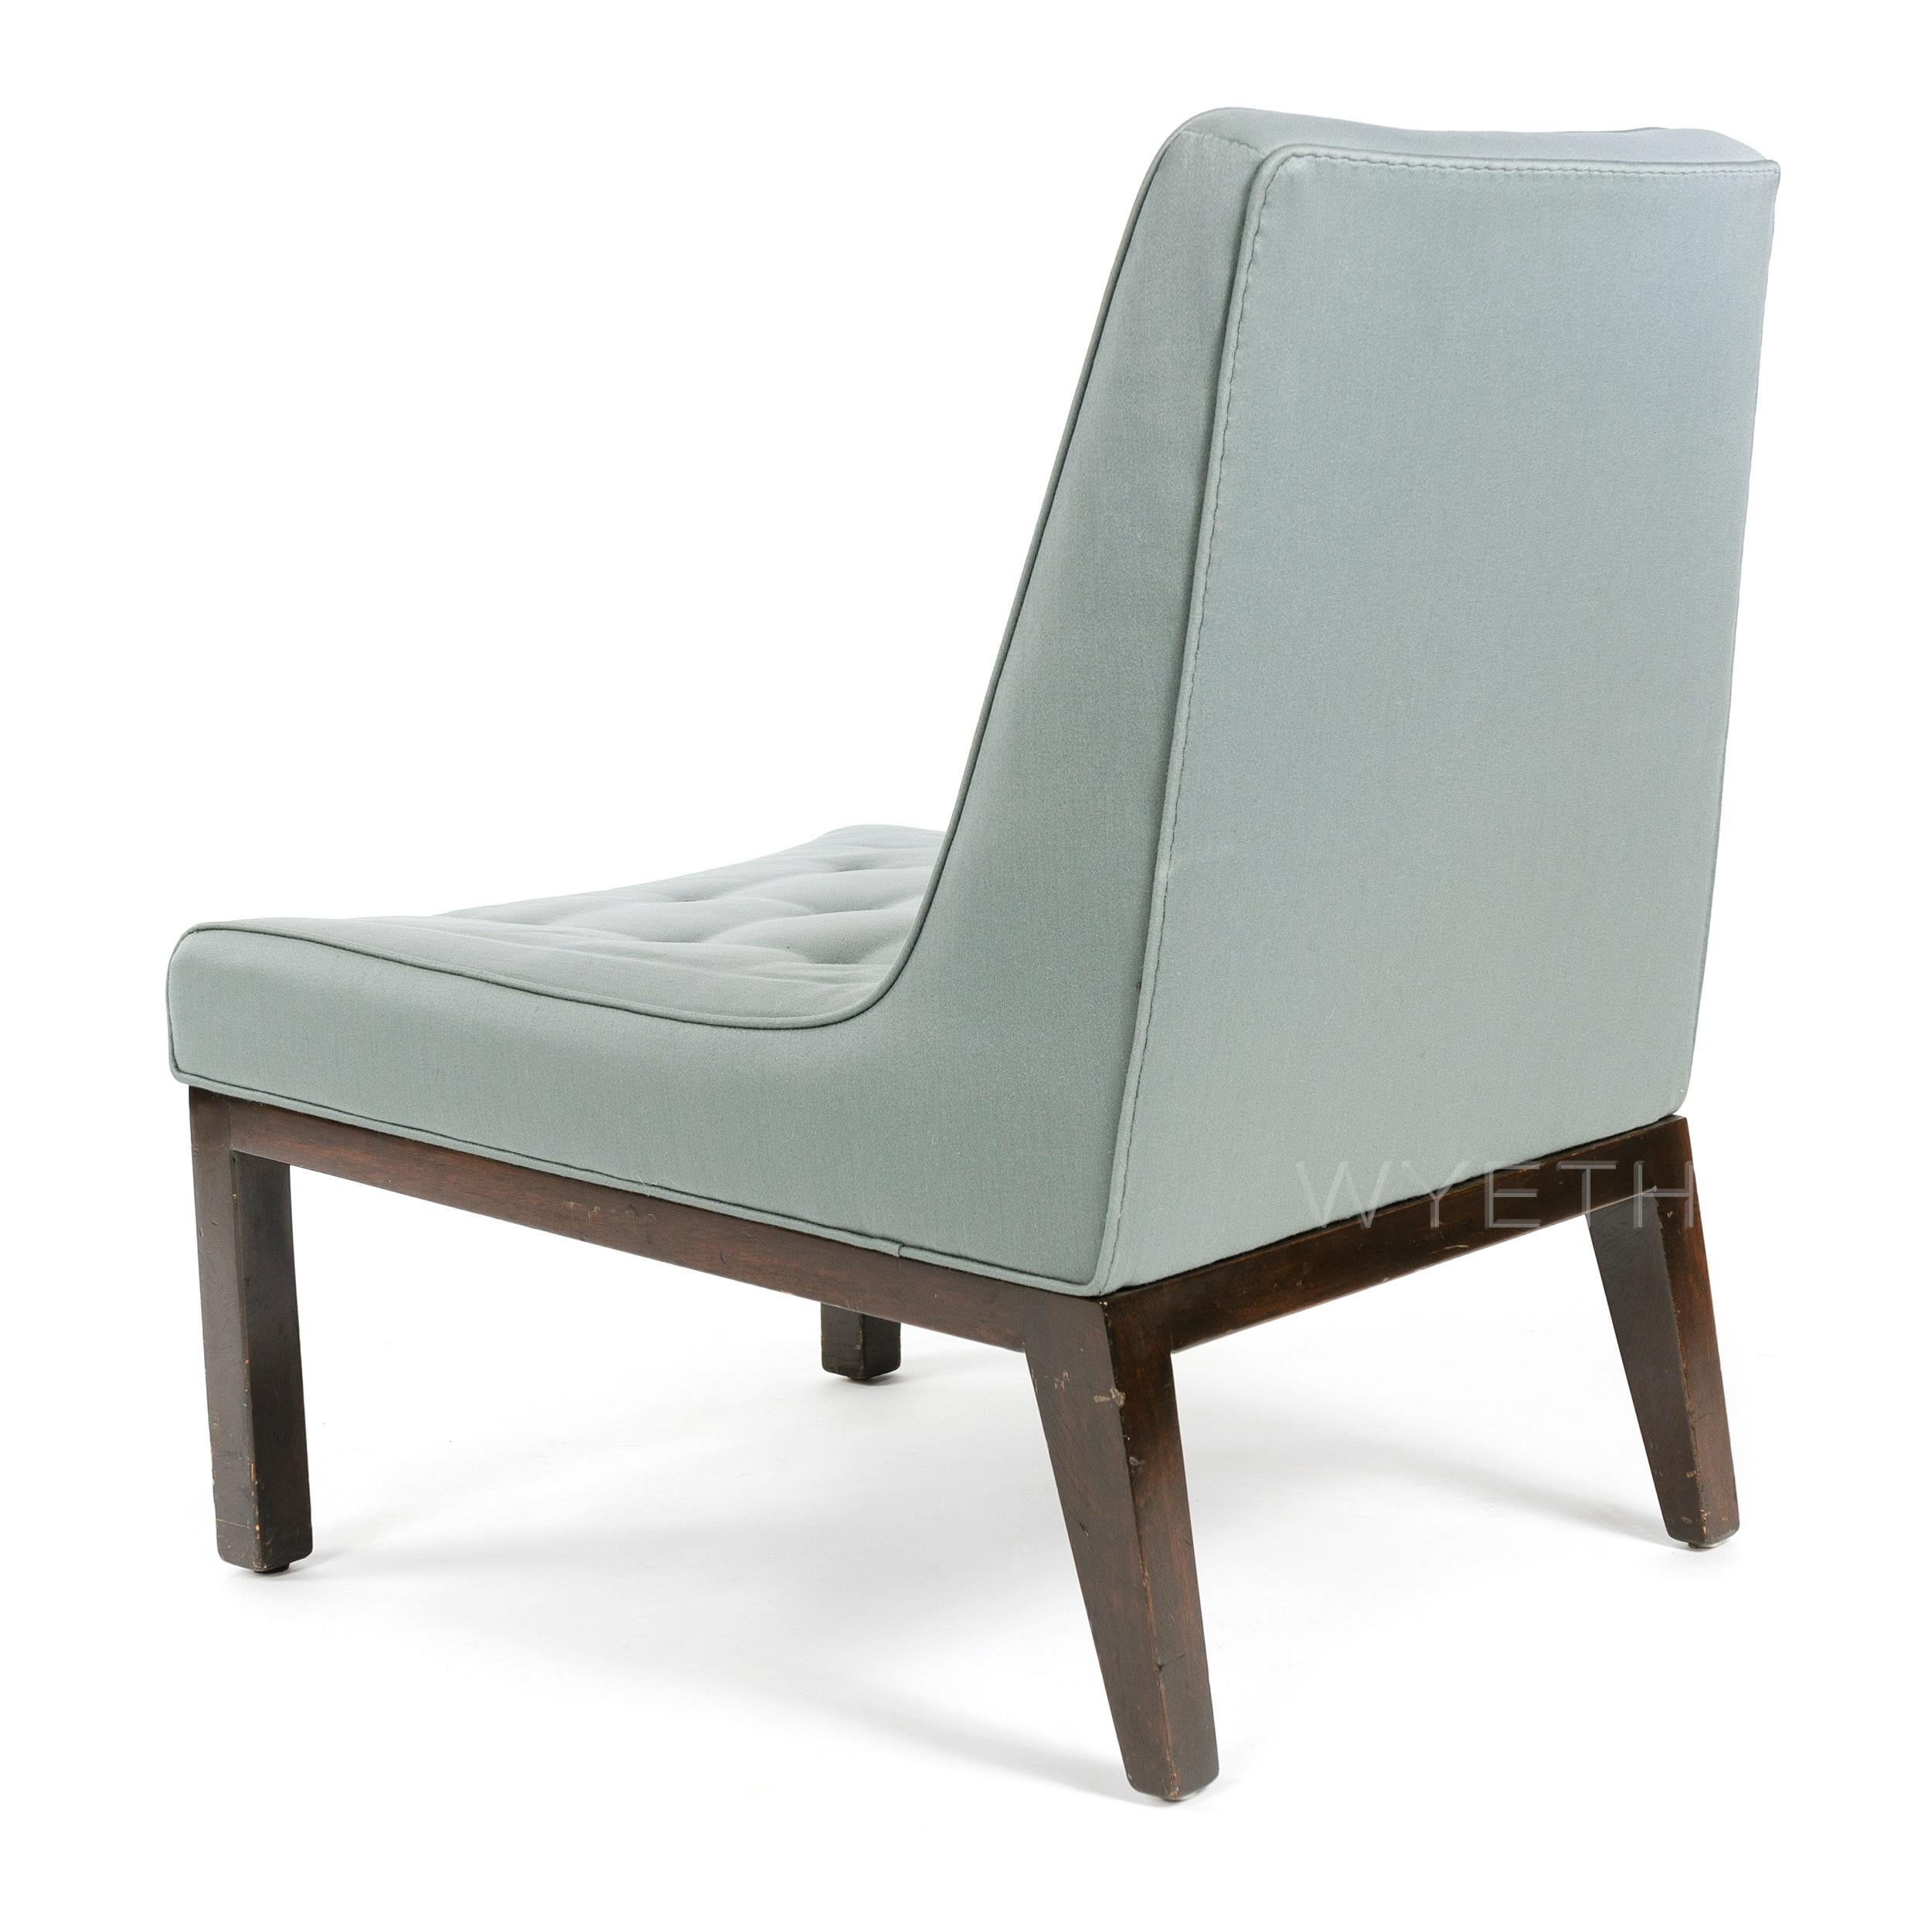 American 1950s Tufted Lounge Chair by Edward Wormley for Dunbar For Sale